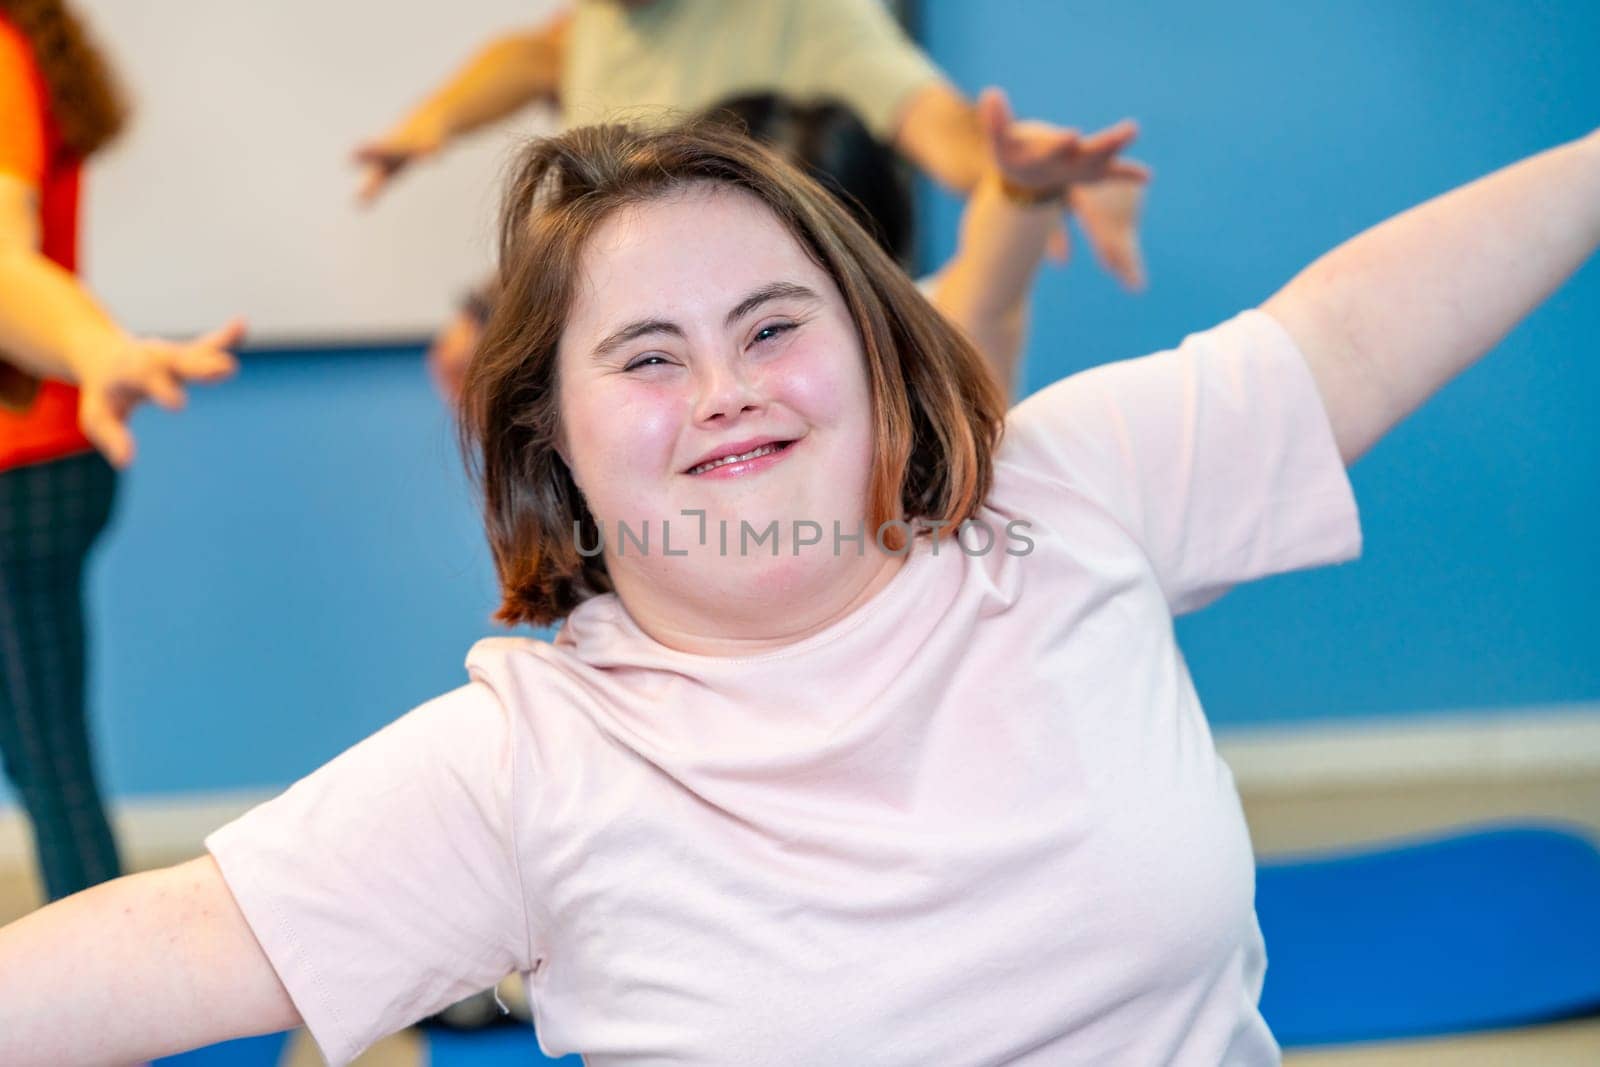 Woman with down syndrome smiling at camera in the gym by Huizi